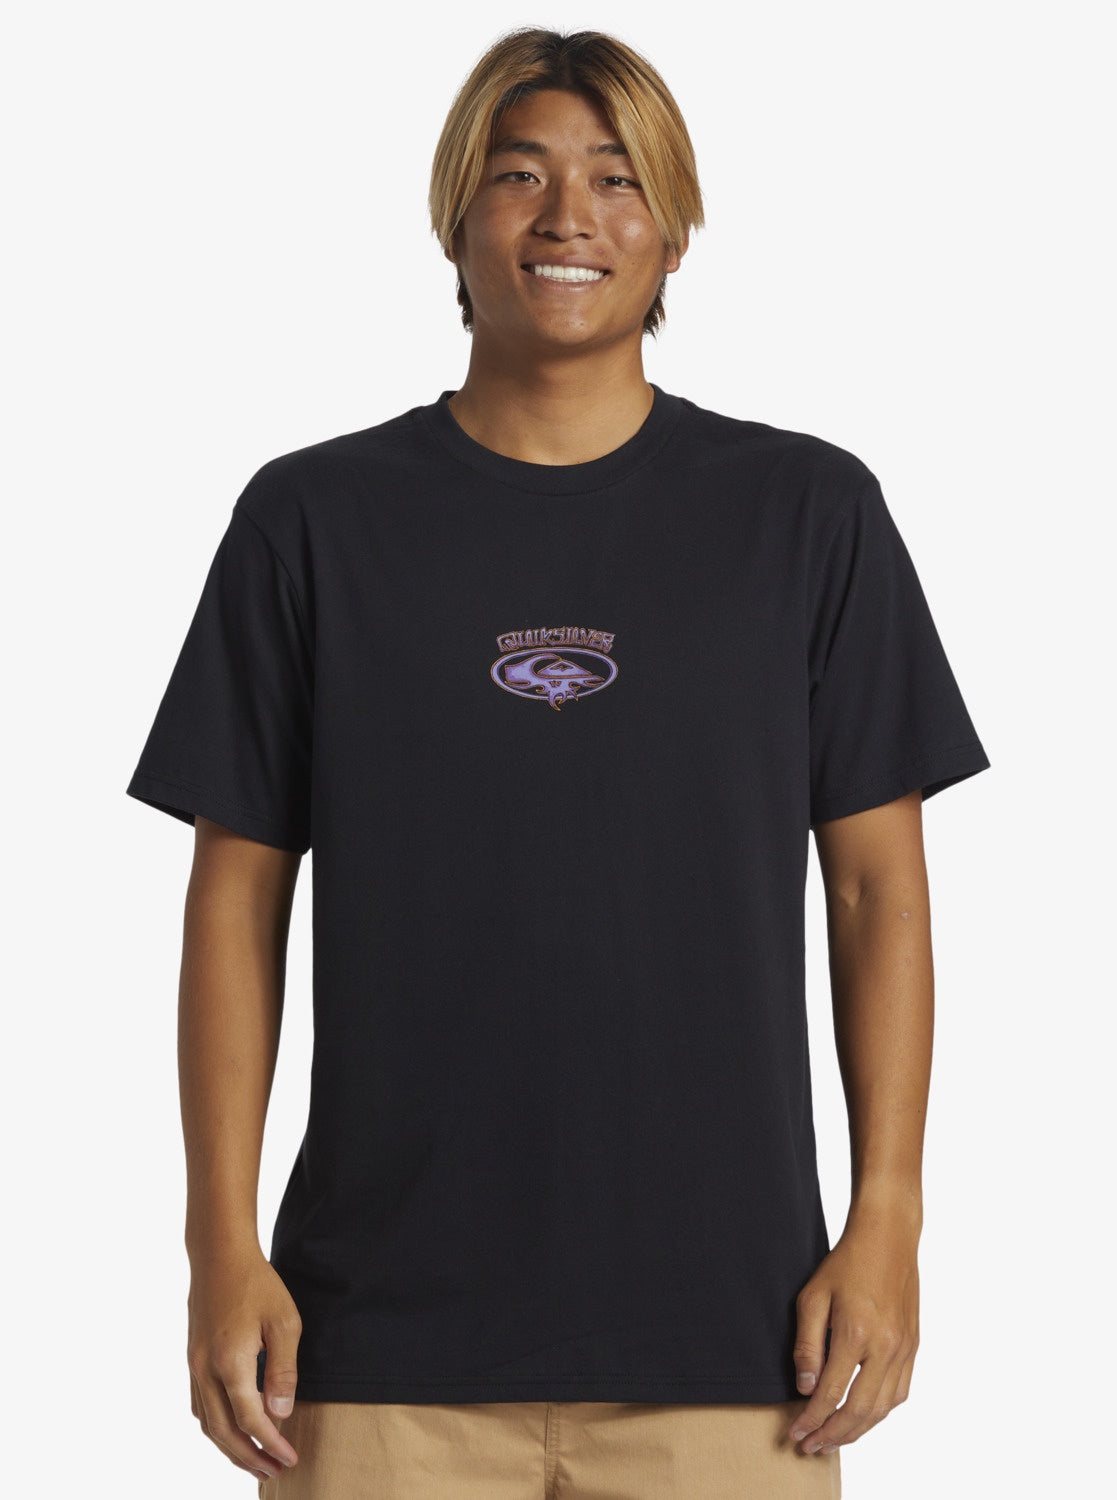 Mens Thorn Oval T-Shirt